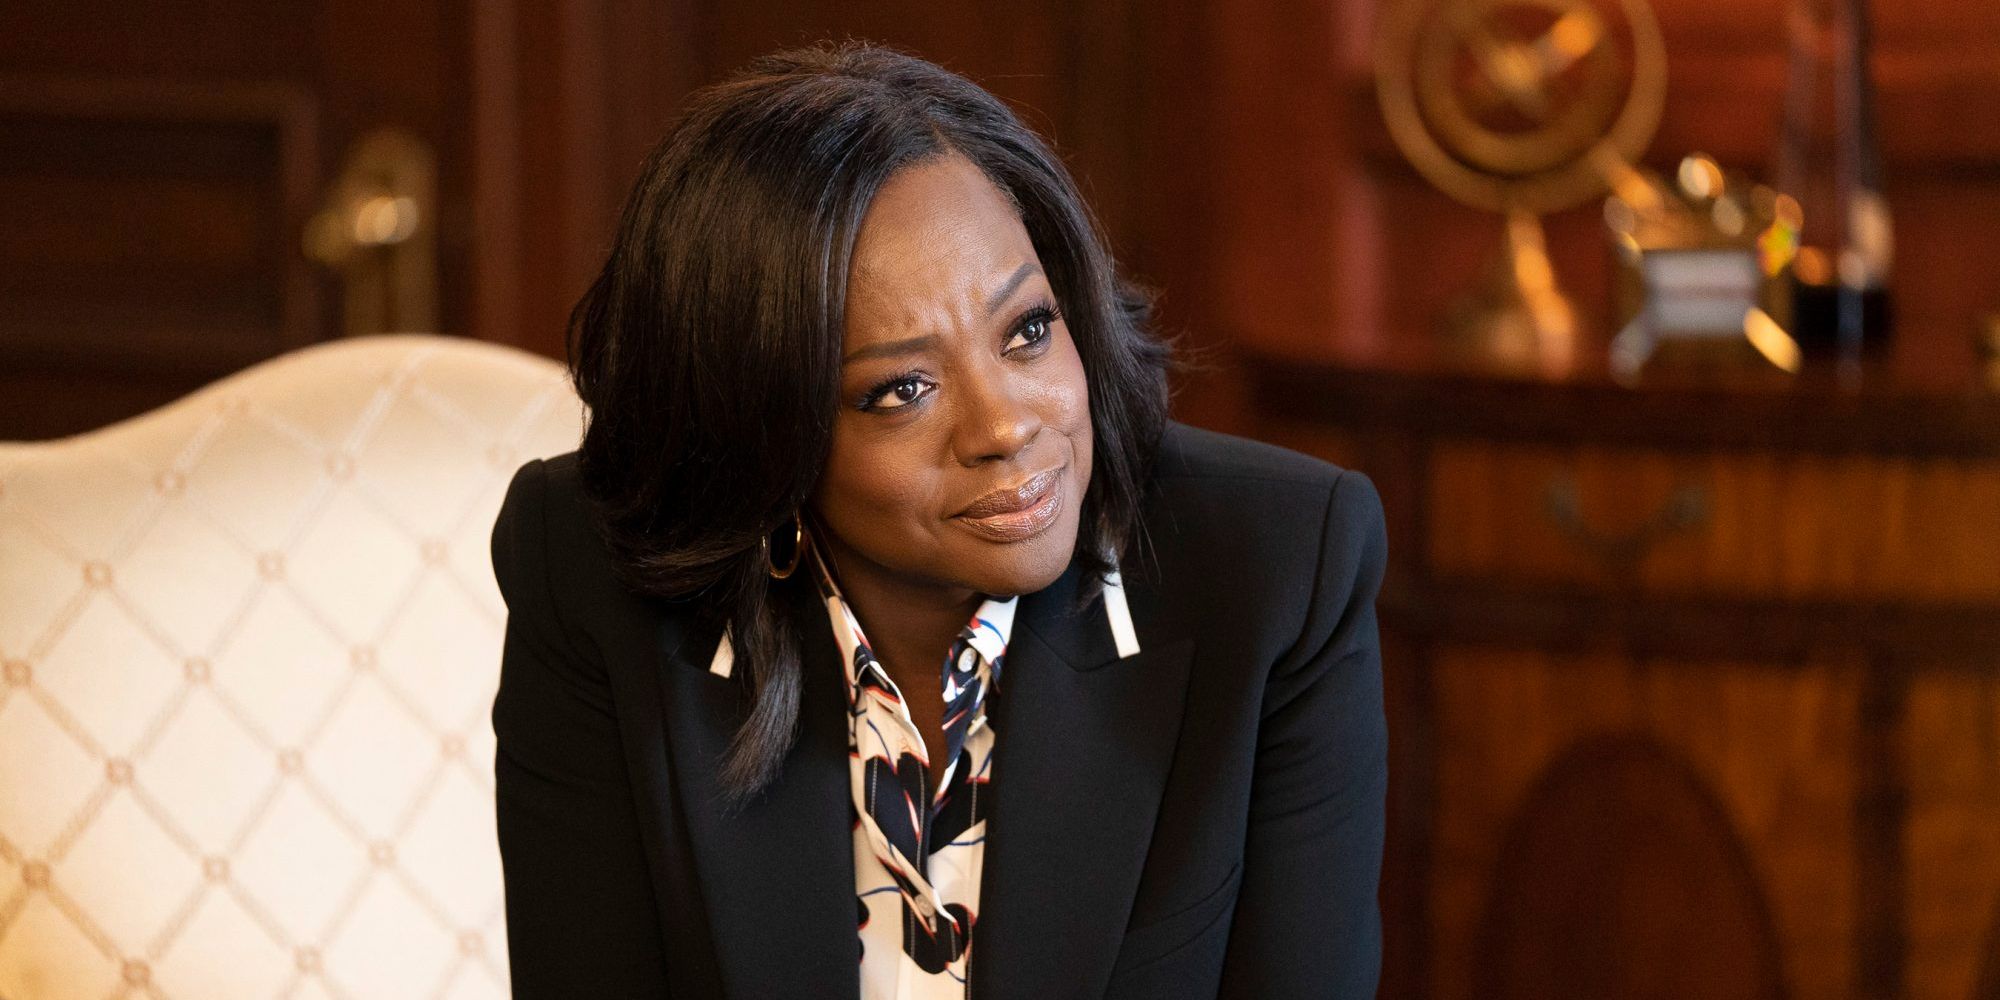 Viola Davis as Annalise Keating in How To Get Away With Murder